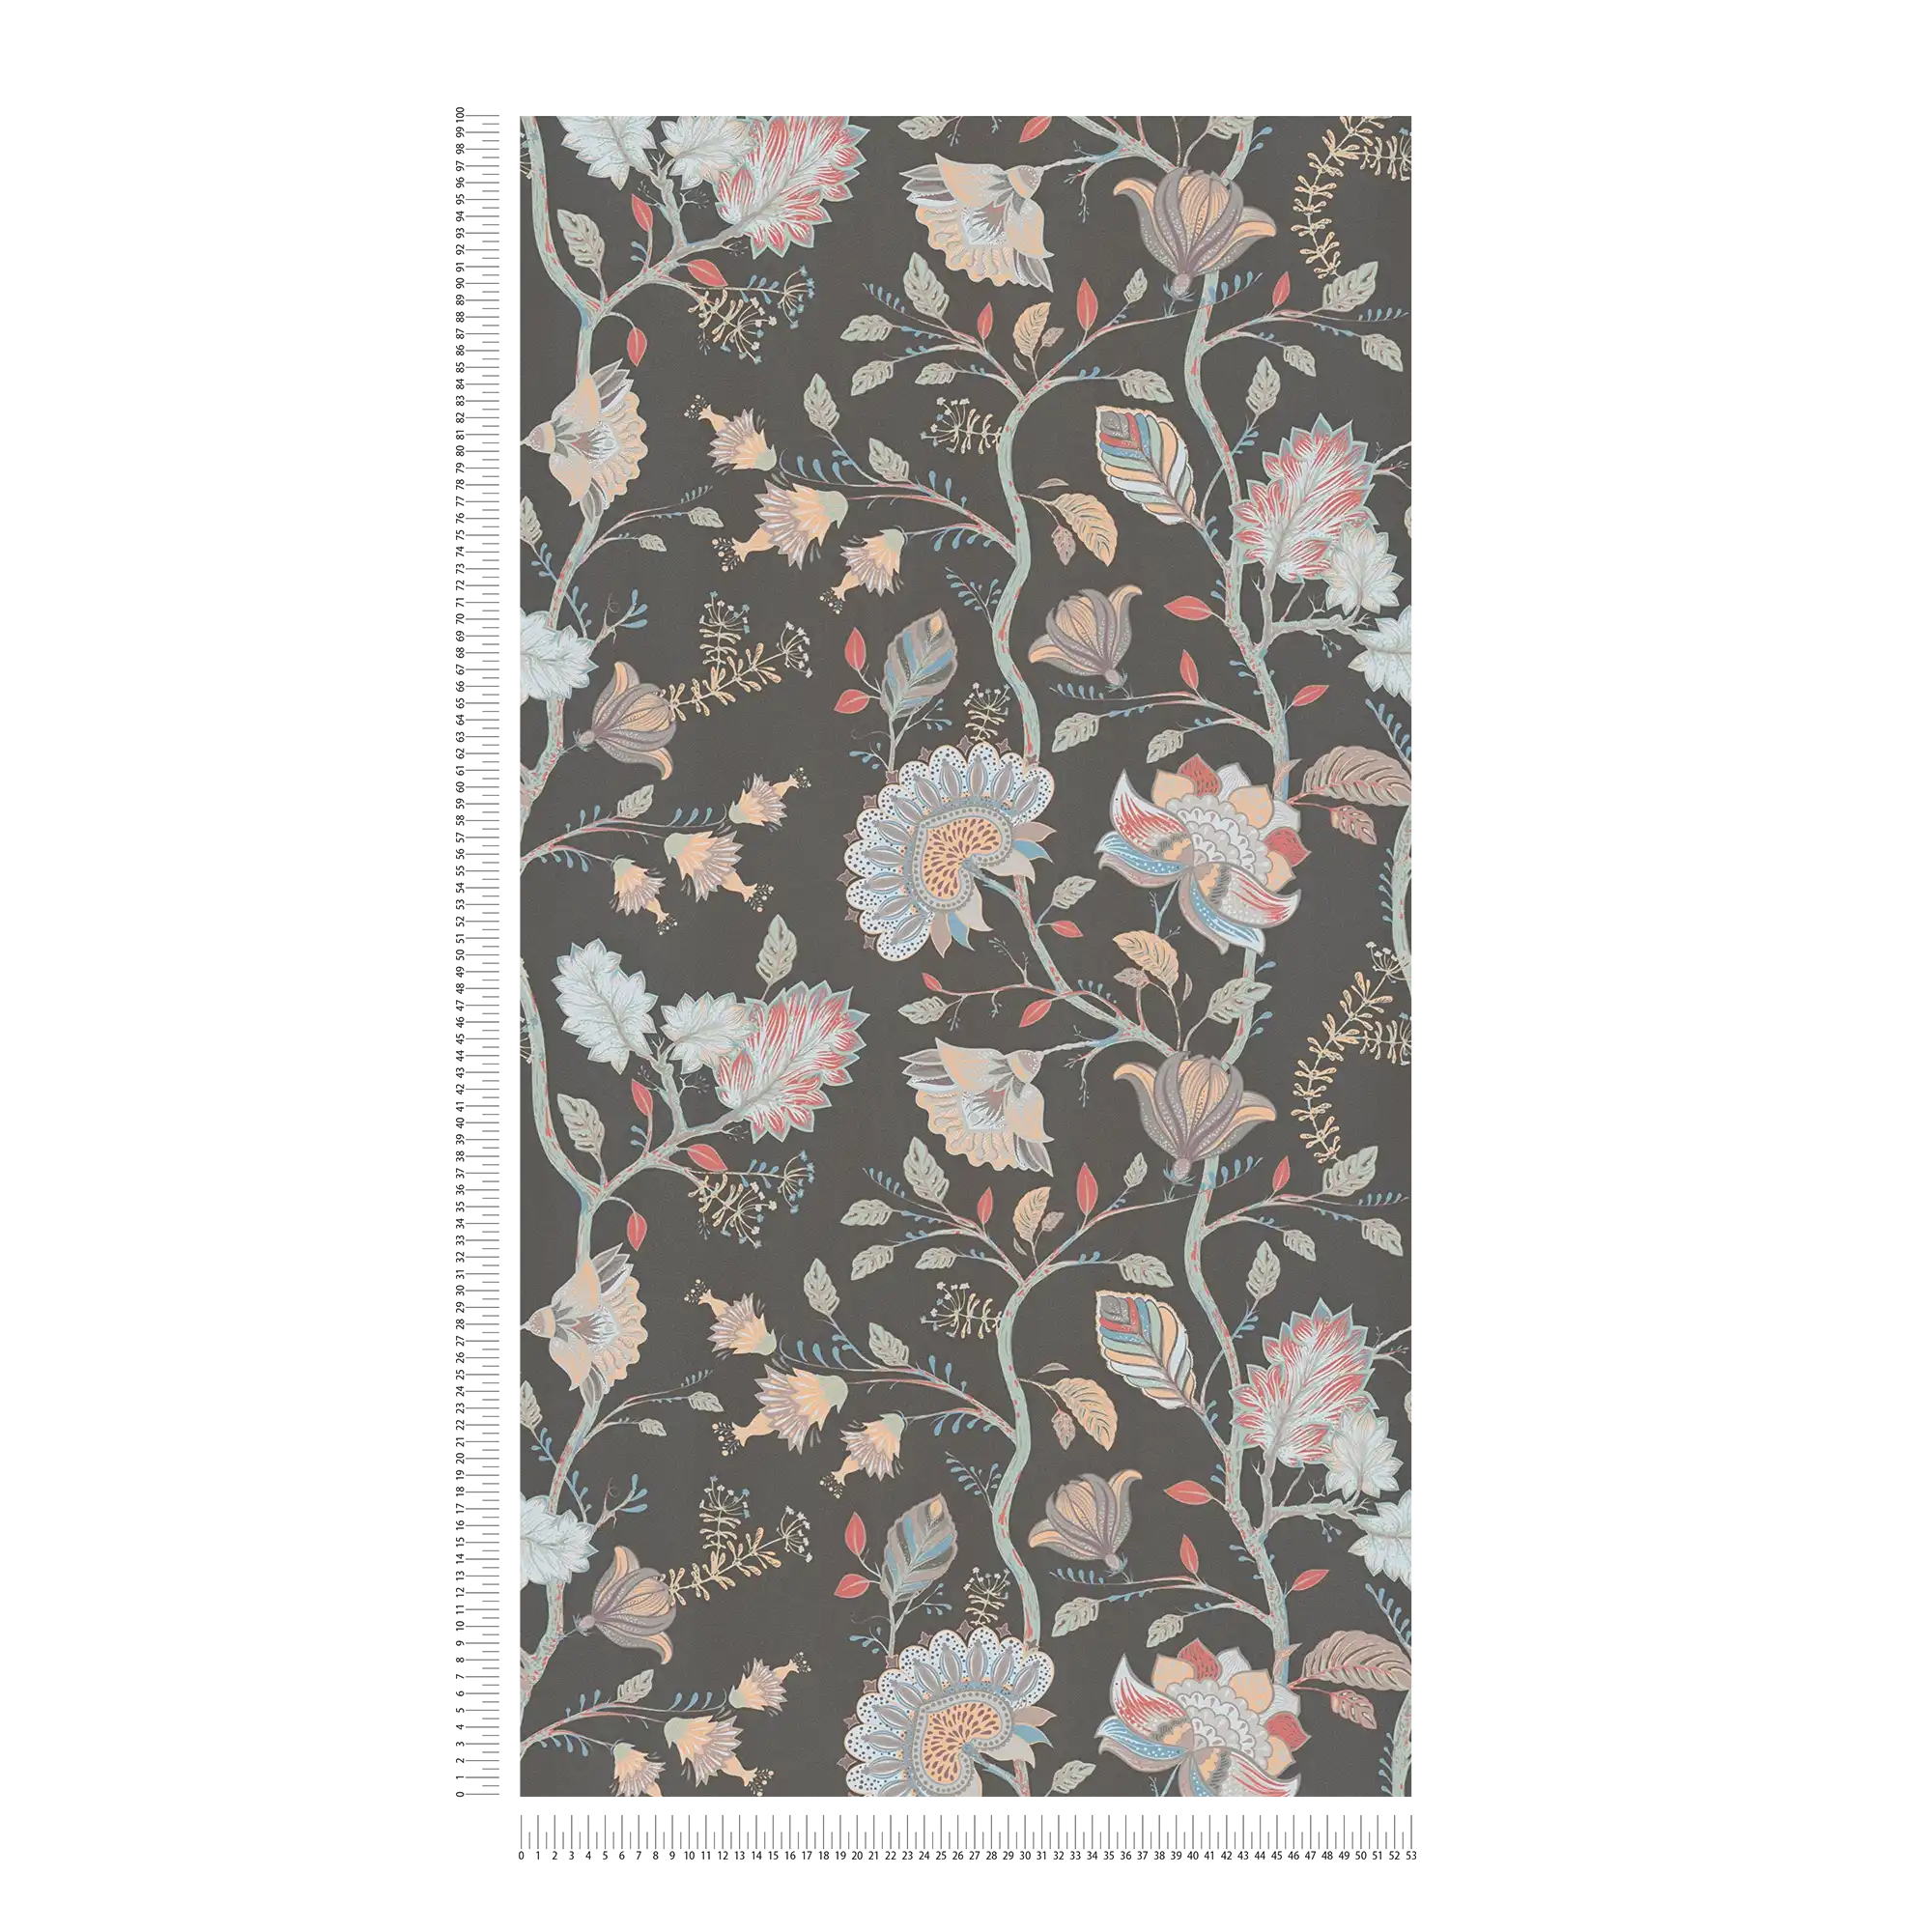             Floral non-woven wallpaper with muted colours - red, green, black
        